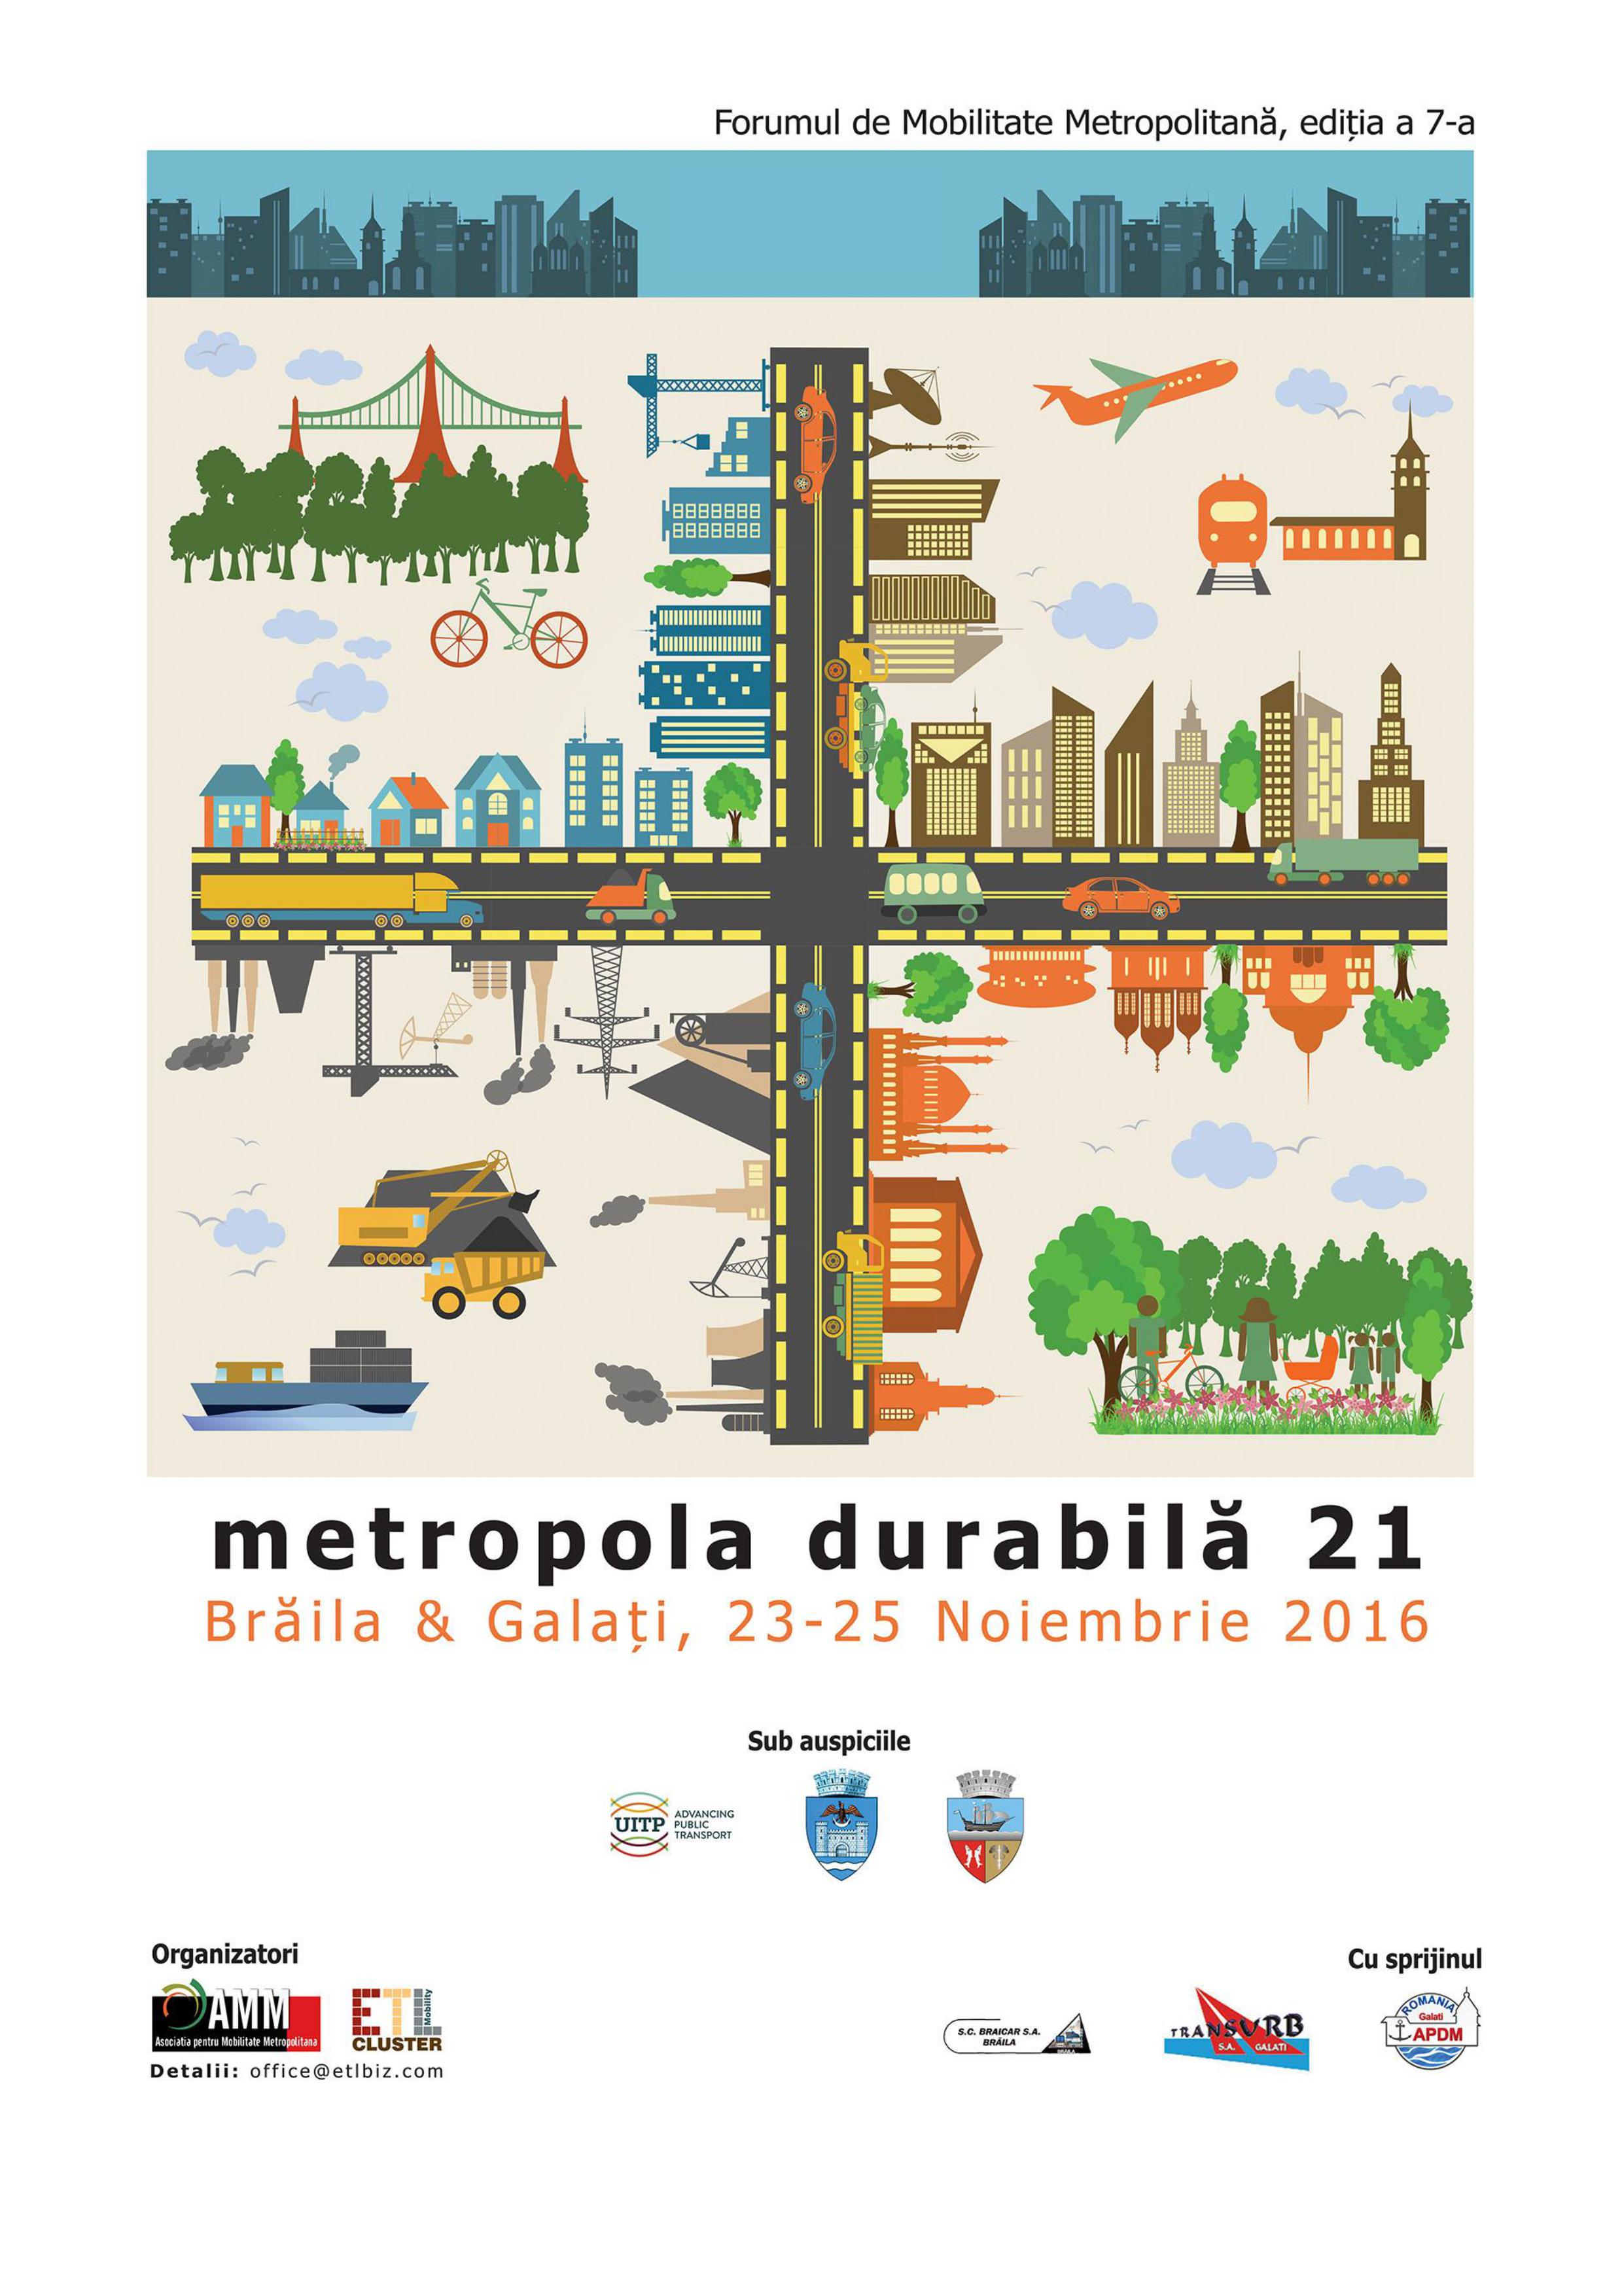 Forum on Sustainable Urban Mobility